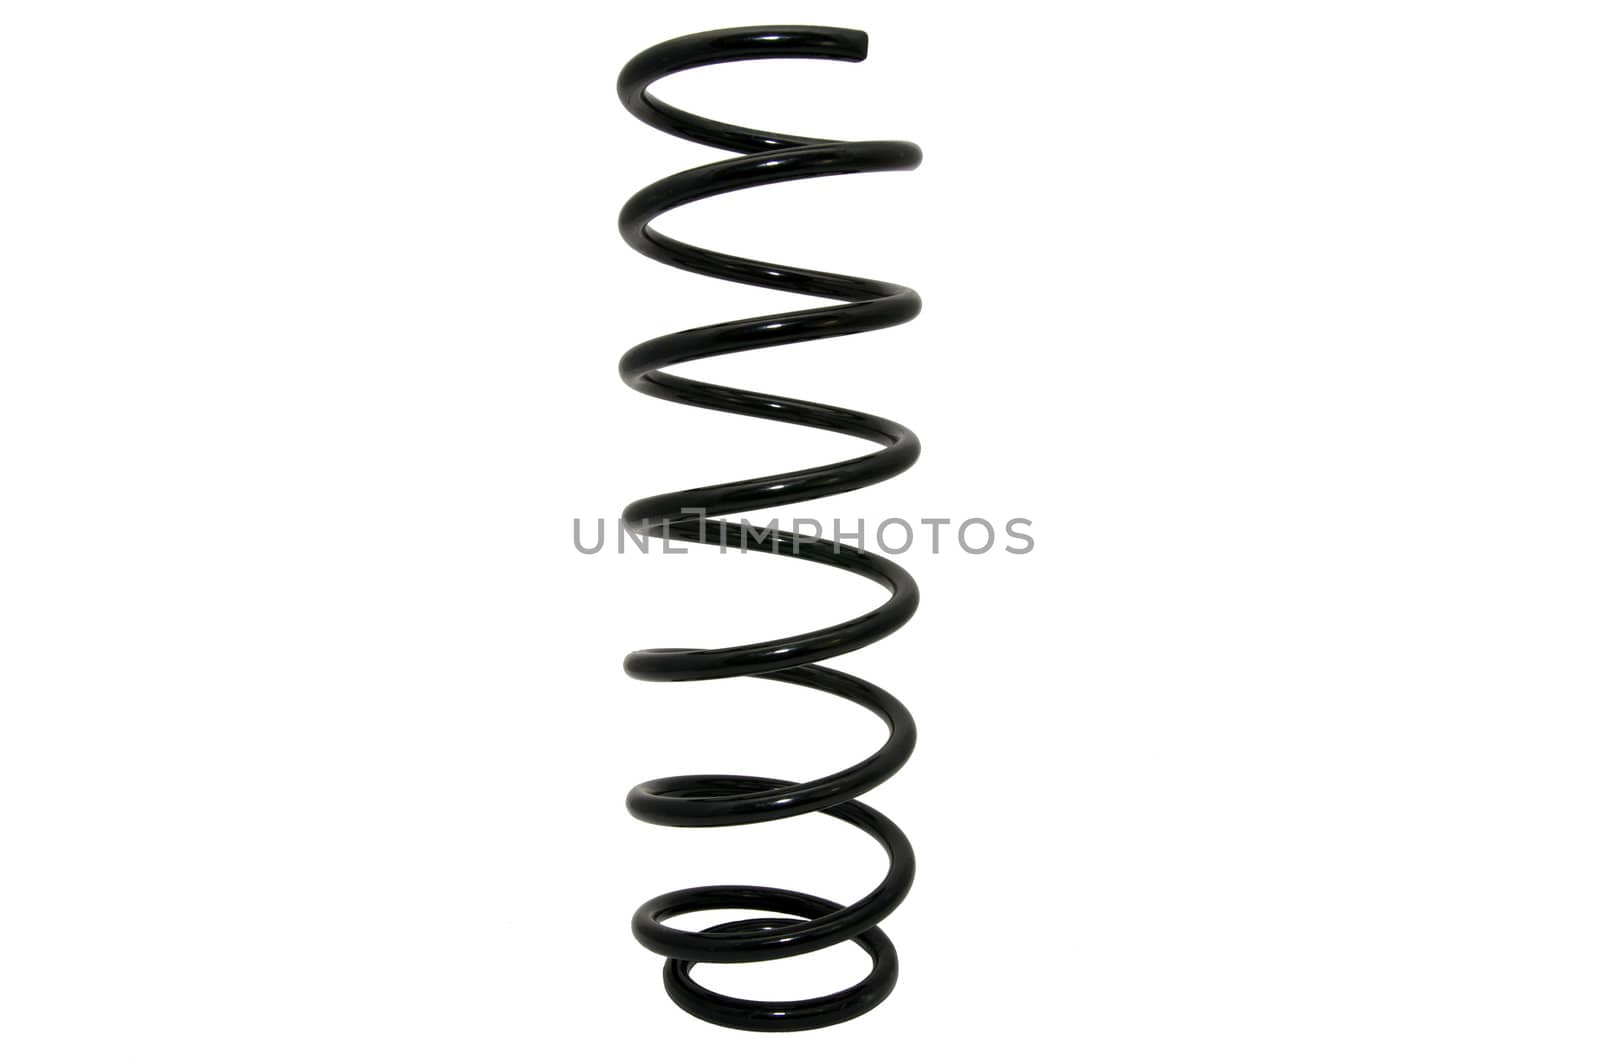 metal spring for a car on a white background